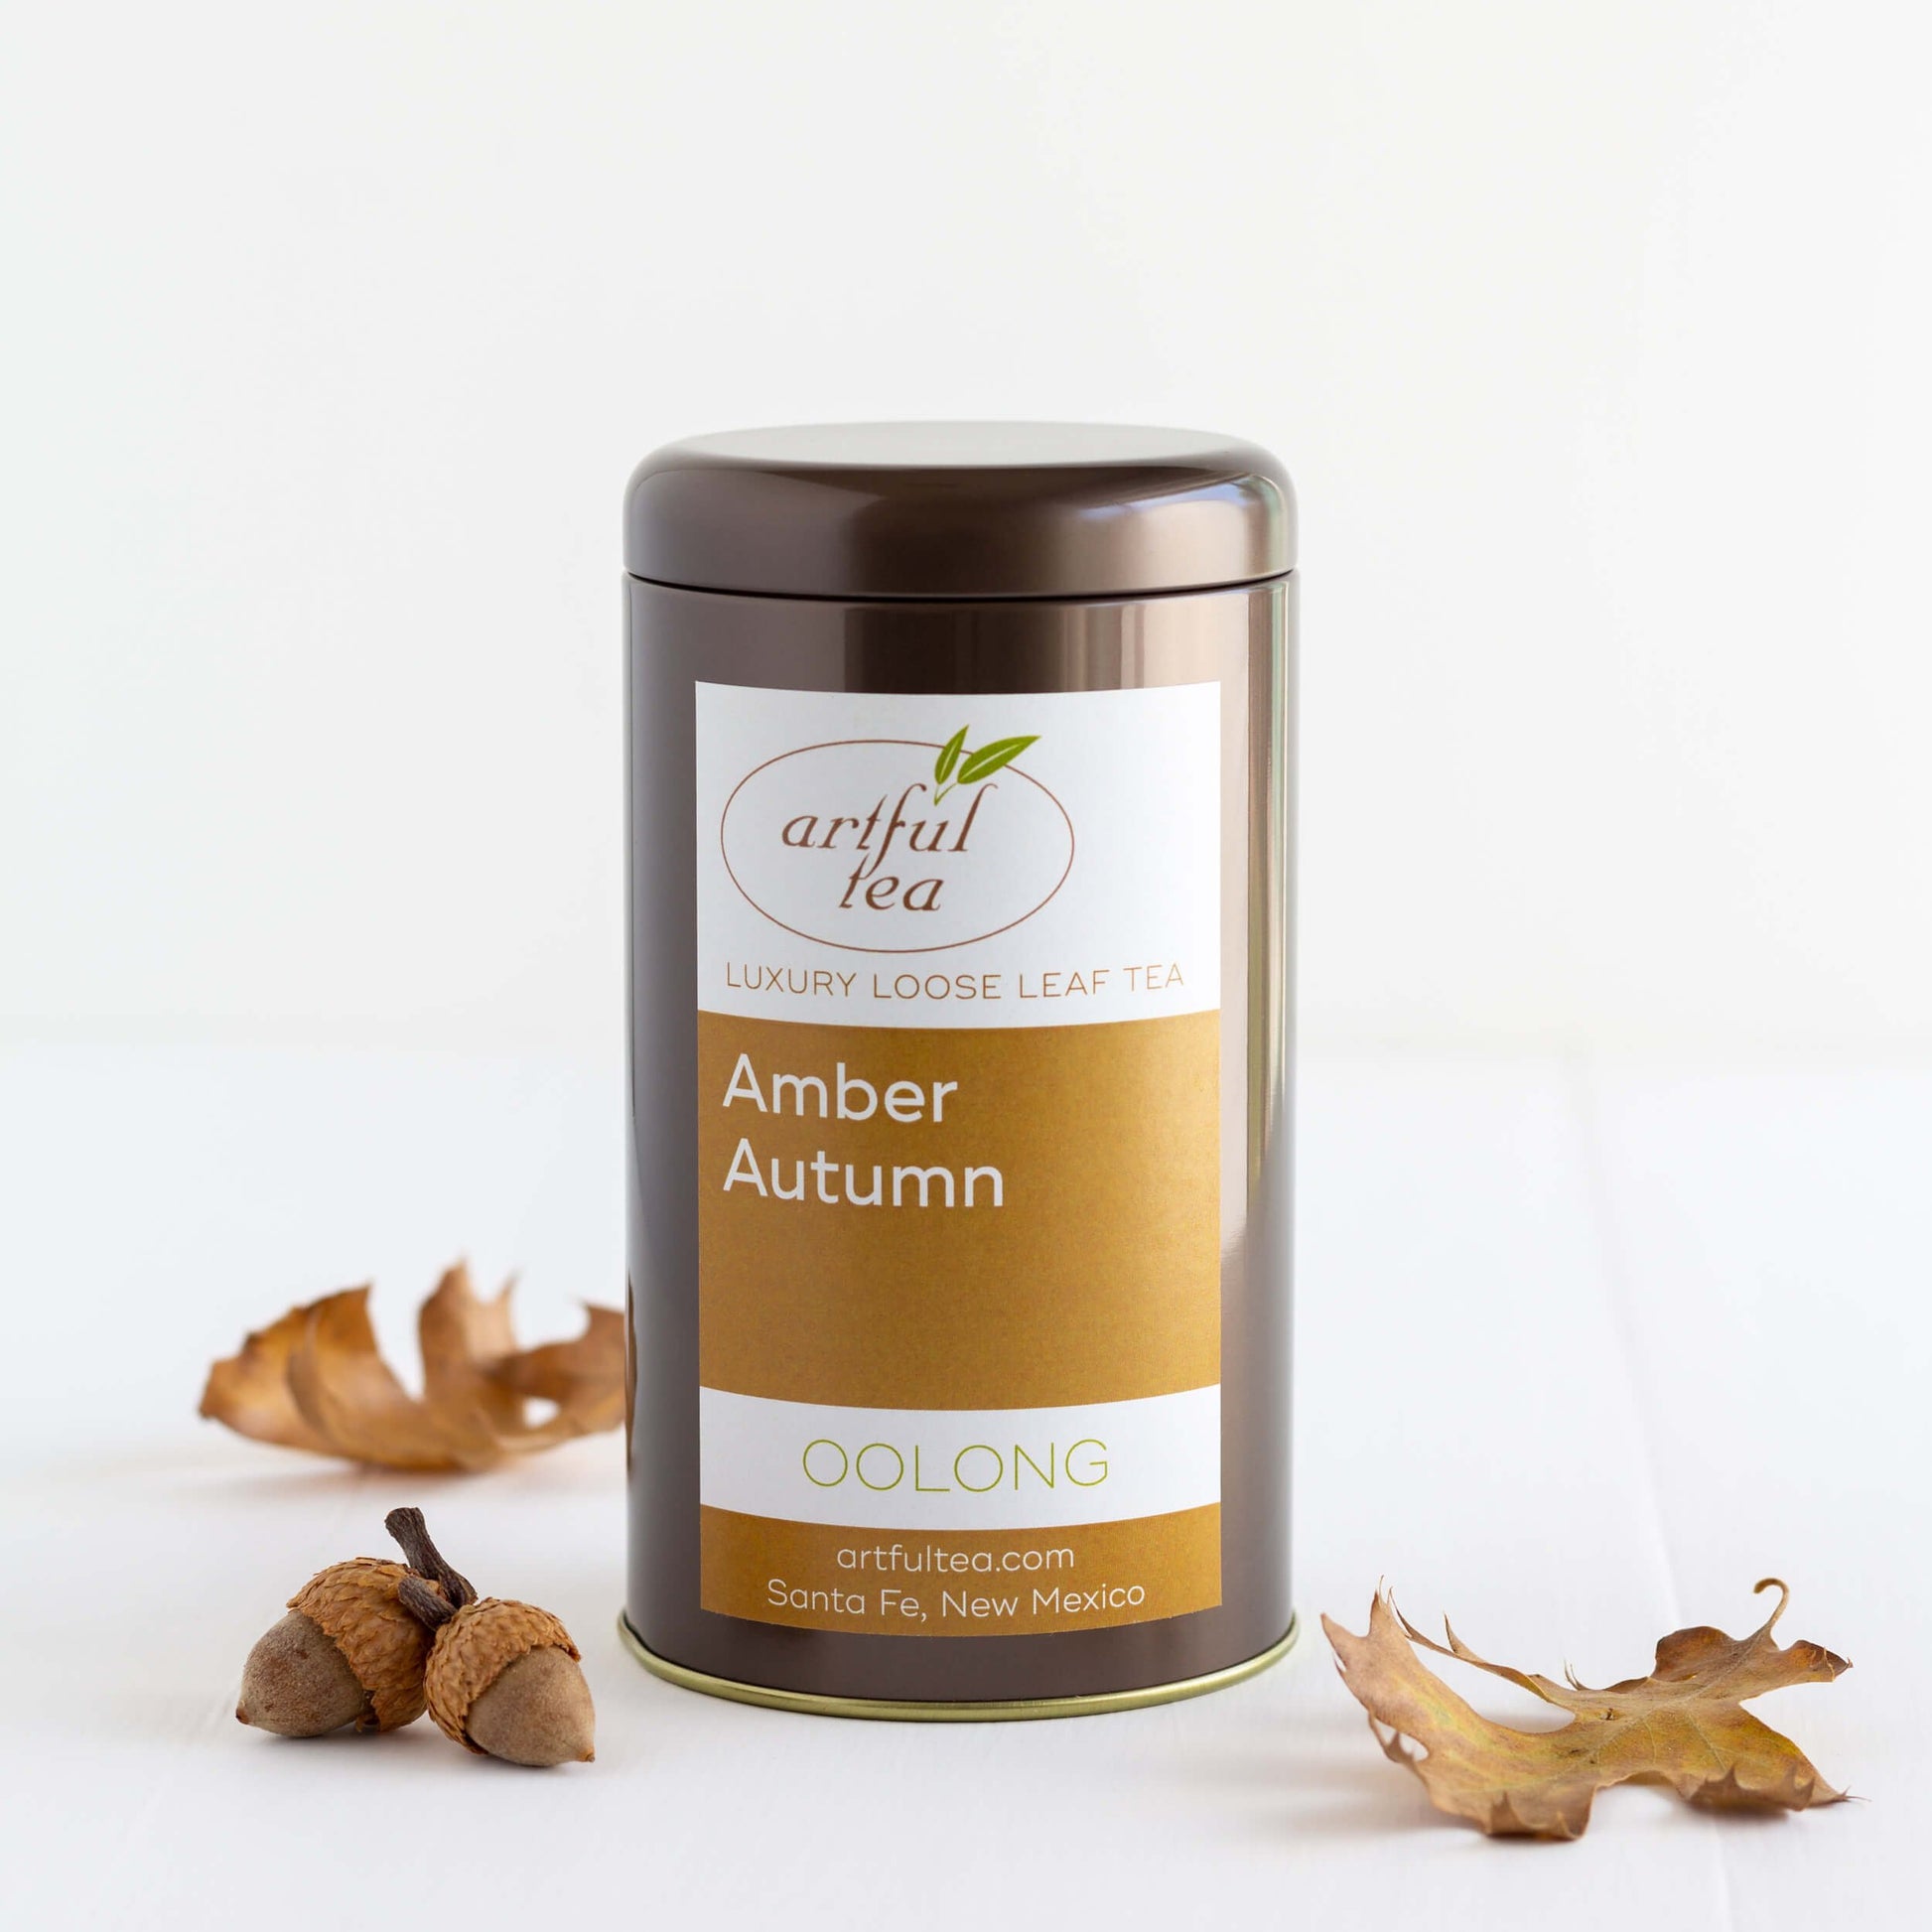 Amber Autumn Oolong shown packaged in a brown tin, with two acorns and two brown tree leaves nearby.